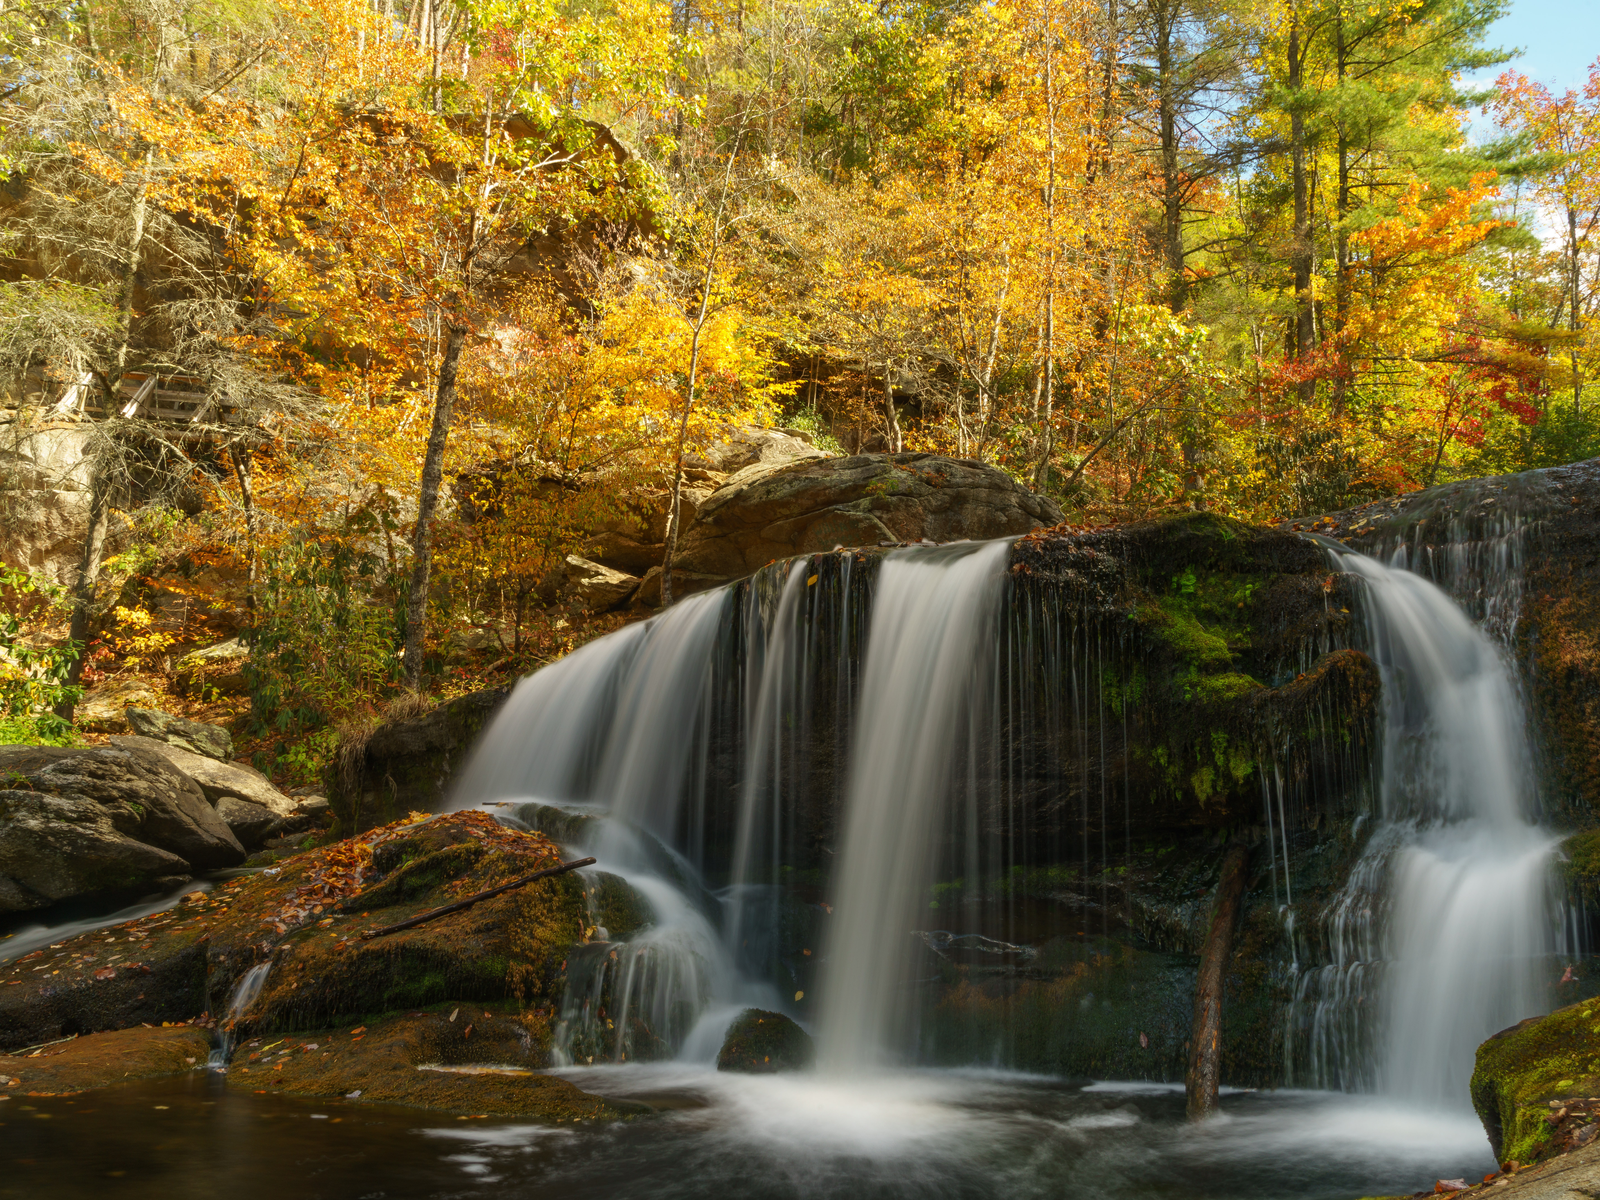 Calm Bald River Falls in Cherokee National Forest, one of the best places to visit in Tennessee, on an Autumn season